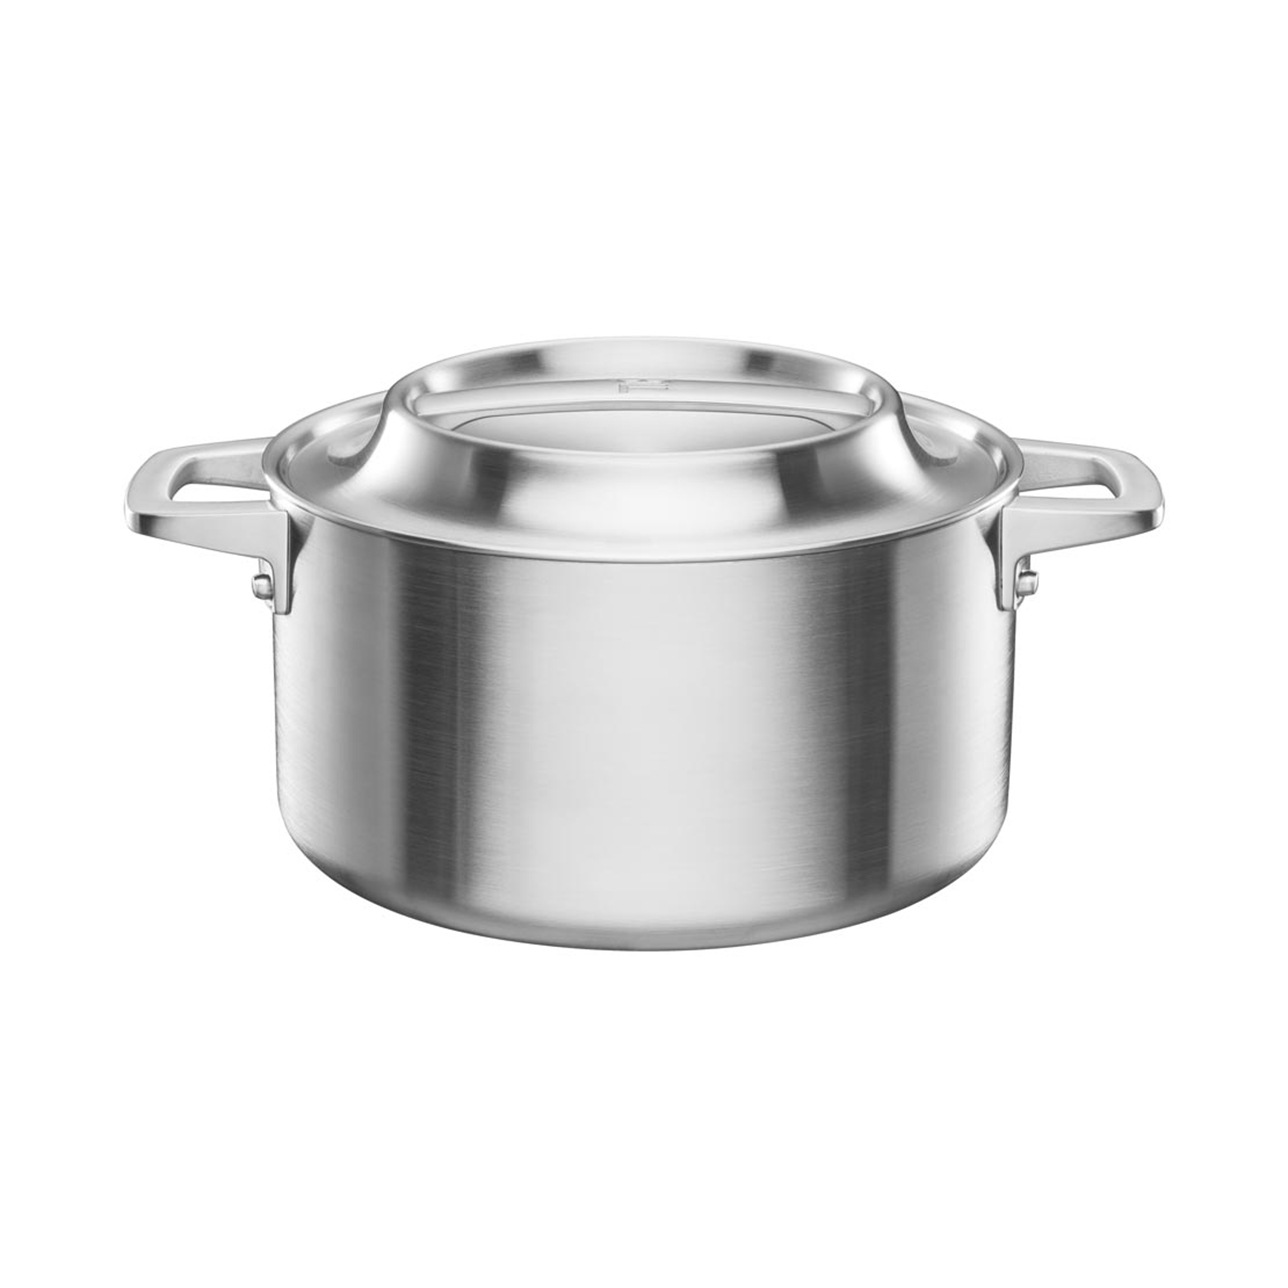 Norden Pot Uncoated Stainless Steel, 3 L